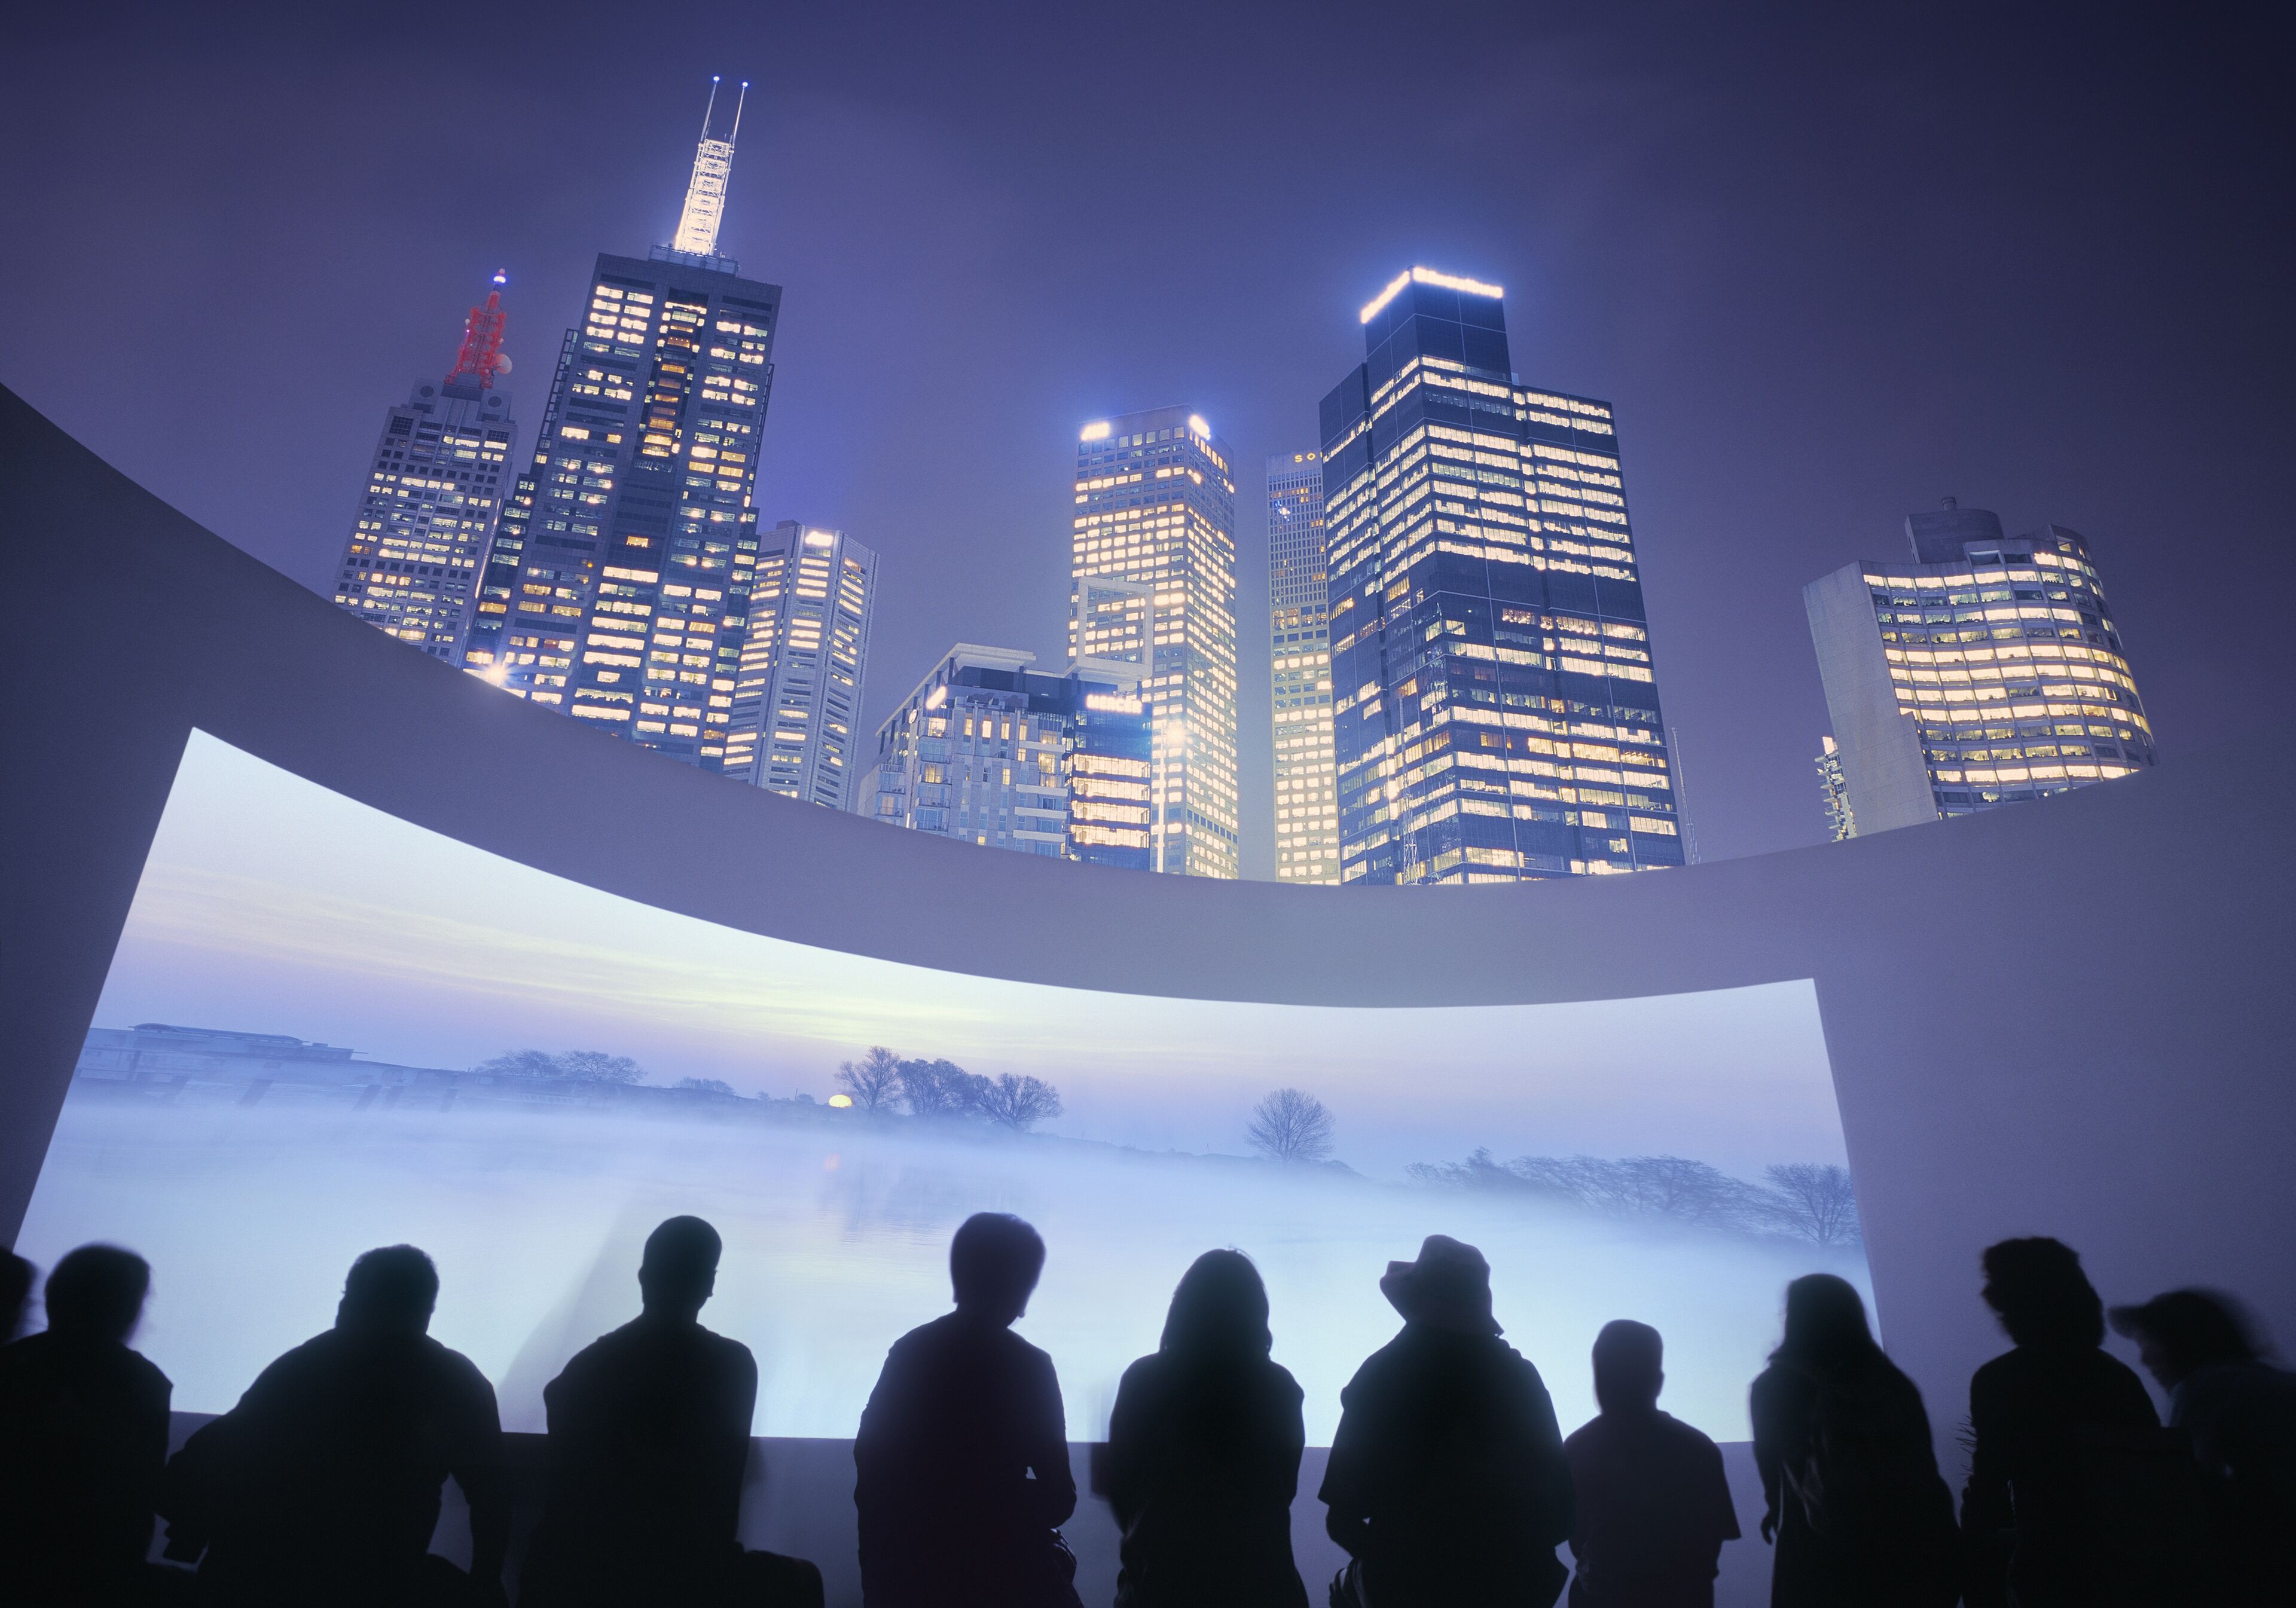 Illuminated Melbourne skyline with people looking at outdoor cinema screen, showing beautiful morning landscape of a lake. Digital composite, image on screen made by EschCollection.